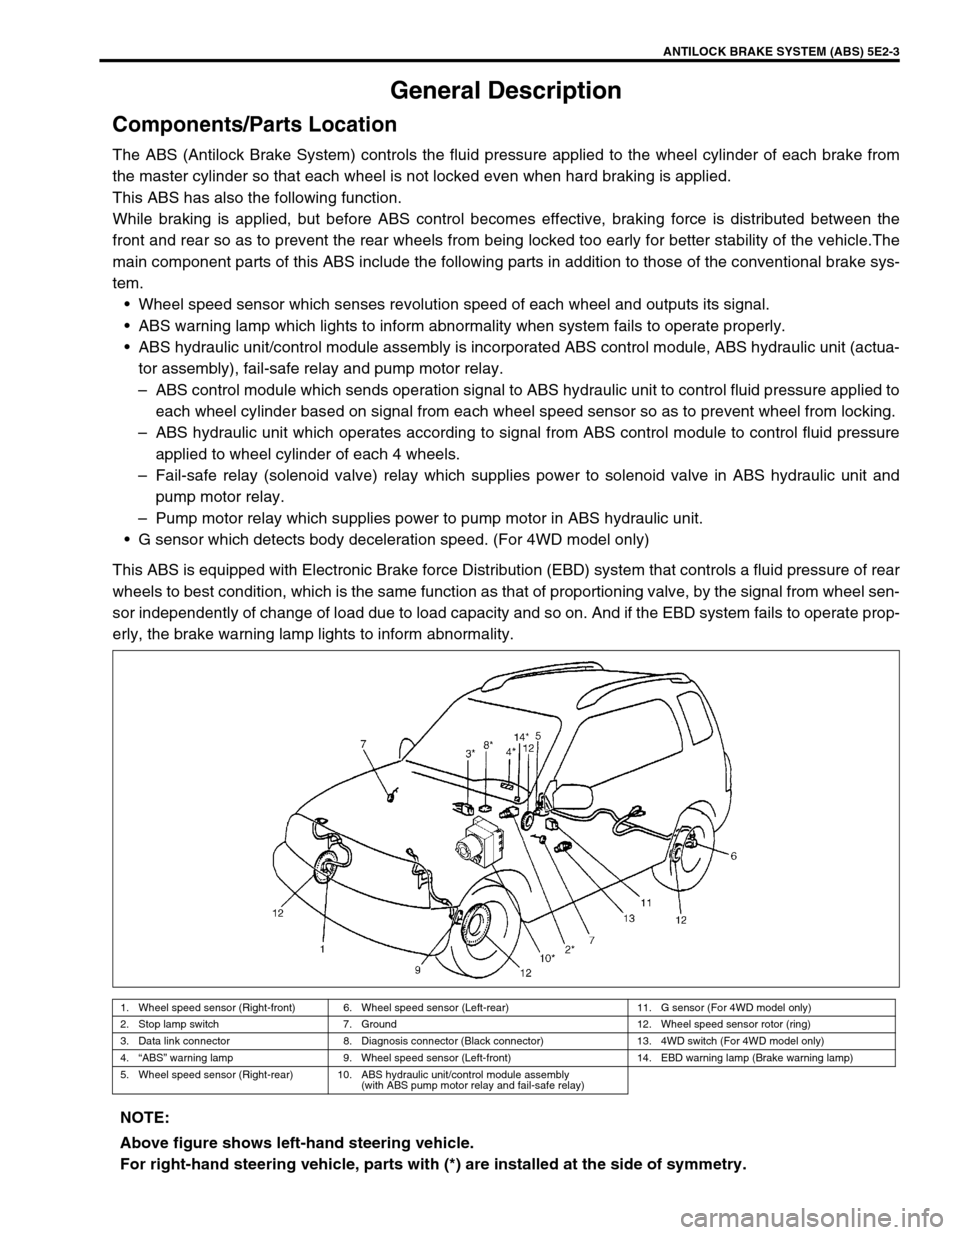 SUZUKI GRAND VITARA 2001 2.G User Guide ANTILOCK BRAKE SYSTEM (ABS) 5E2-3
General Description
Components/Parts Location
The ABS (Antilock Brake System) controls the fluid pressure applied to the wheel cylinder of each brake from
the master 